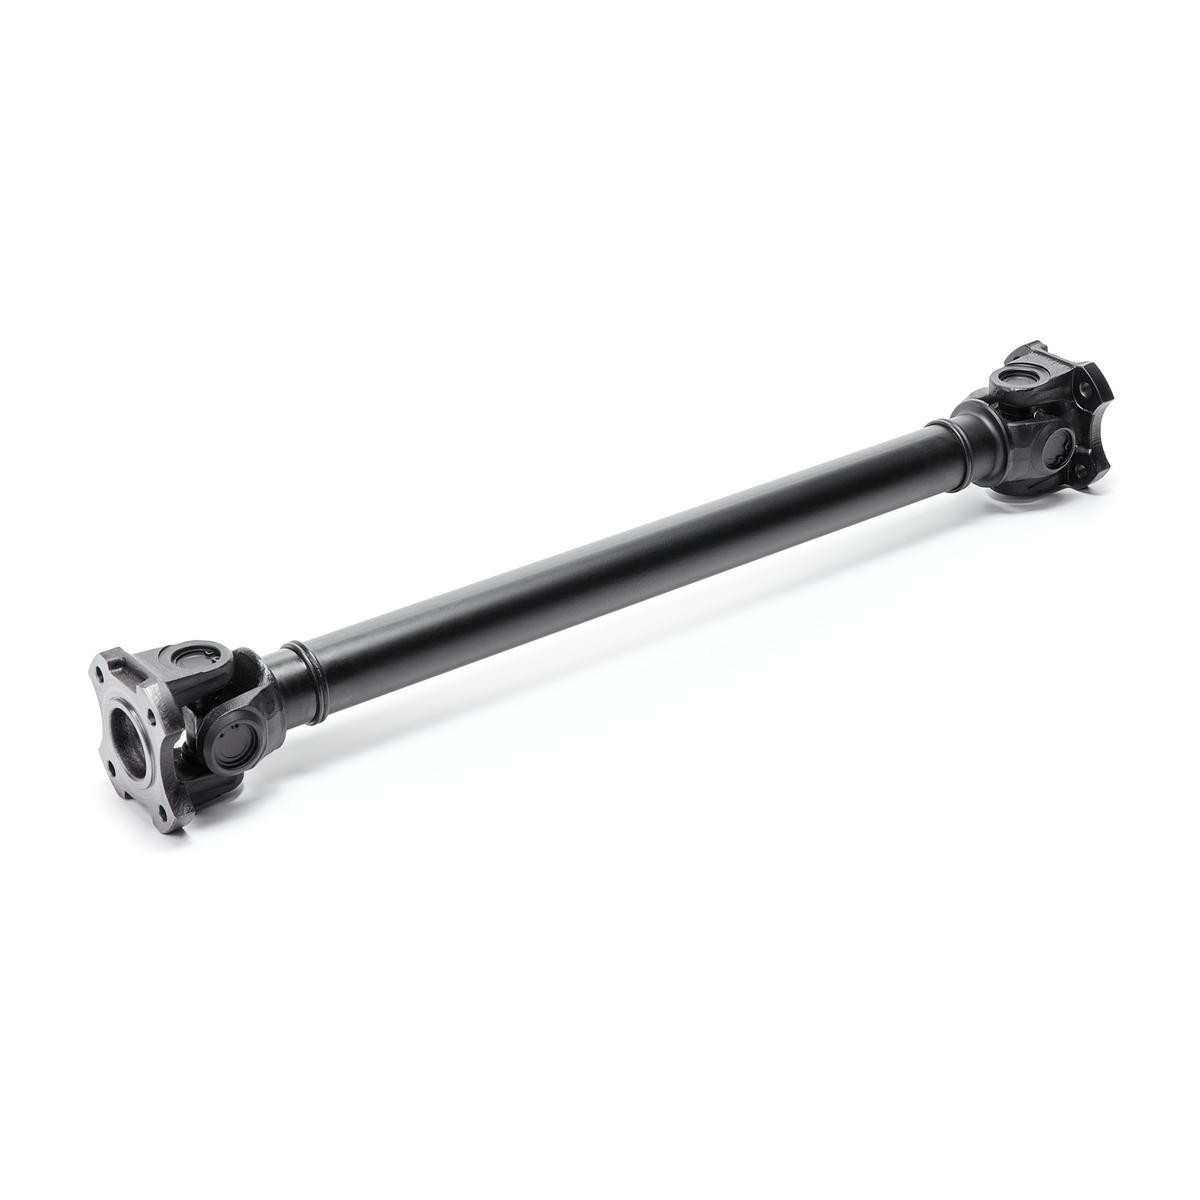 Chrysler Propshaft, axle drive NTY NWN-BM-003 at a good price